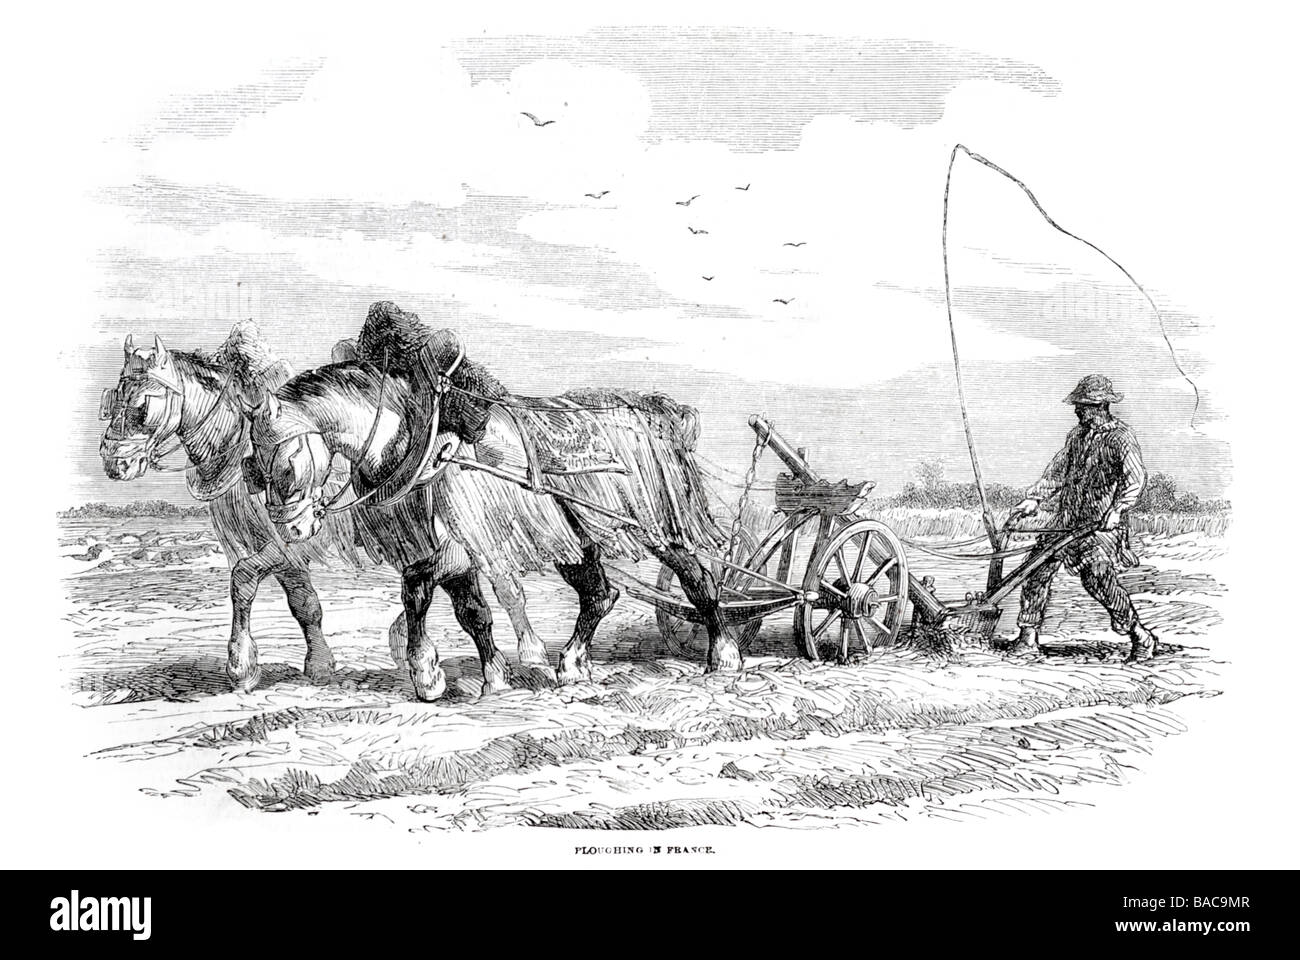 ploughing in france 1854 plough farming cultivation horses agriculture Stock Photo